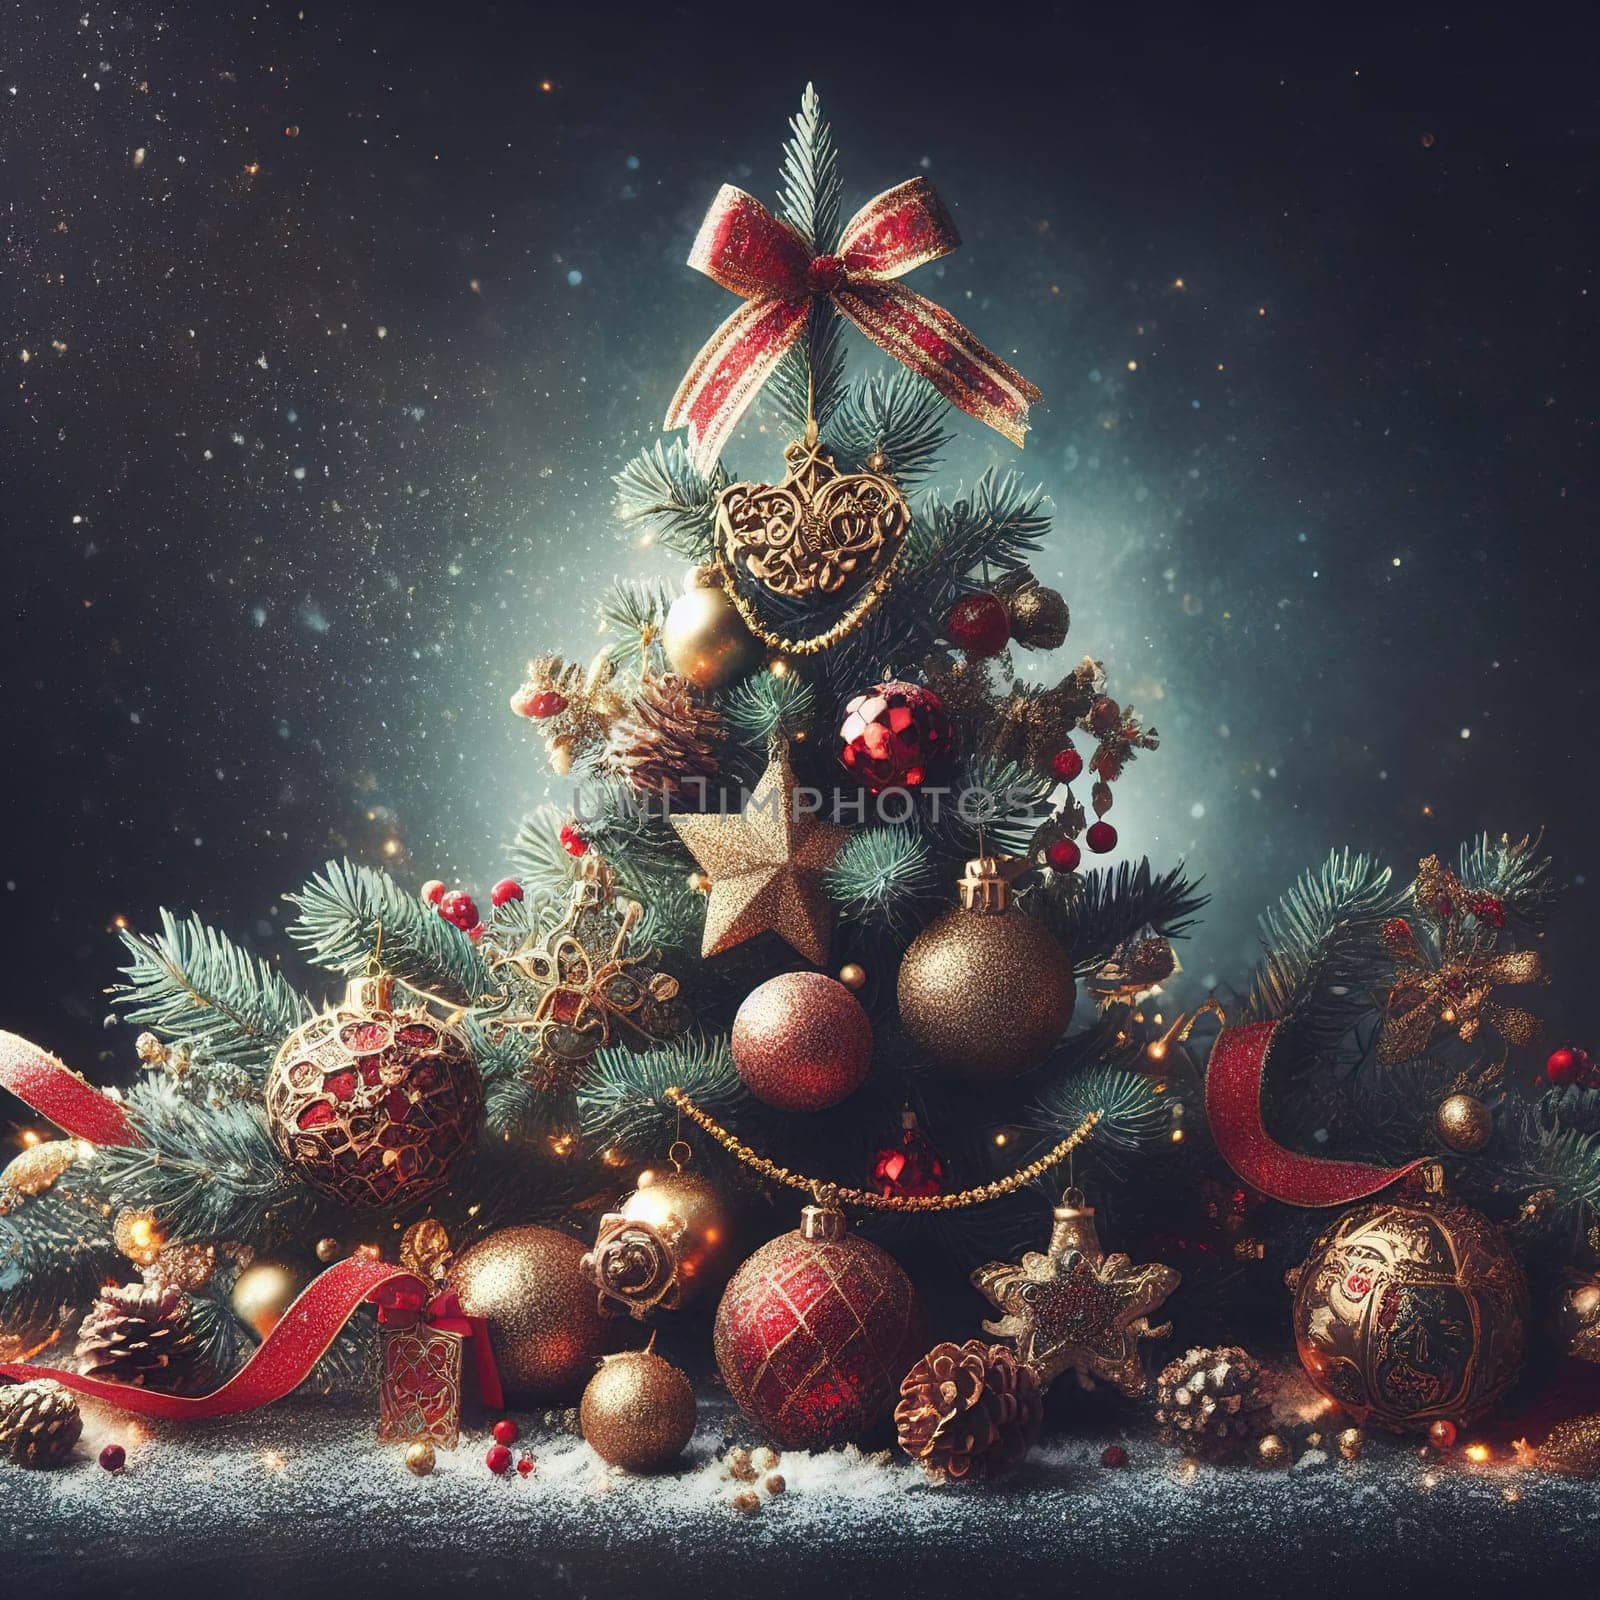 Christmas tree with gifts and lights on the background of a winter landscape.Christmas decoration with gift boxes and baubles on a dark background.Christmas and New Year background with Christmas tree and decorations. Vintage style toned picture.